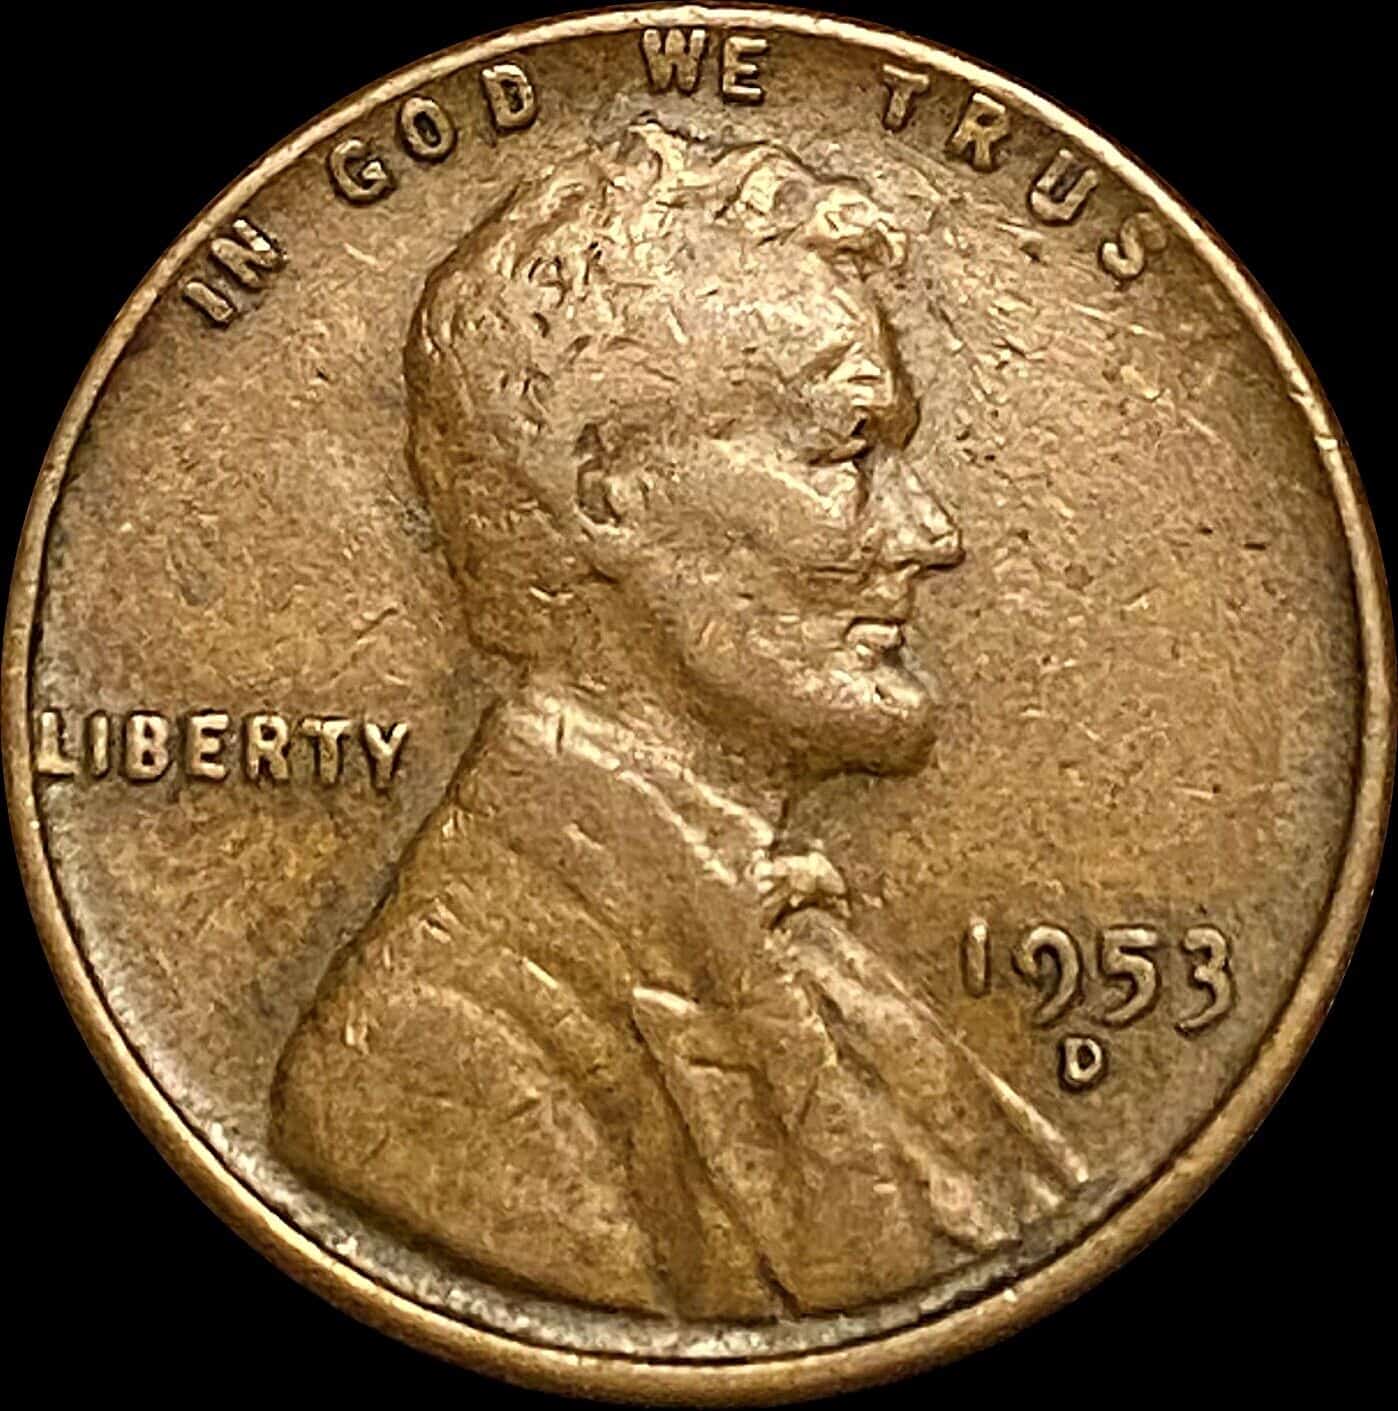 1953 Wheat Penny Value for “D” Mint Mark